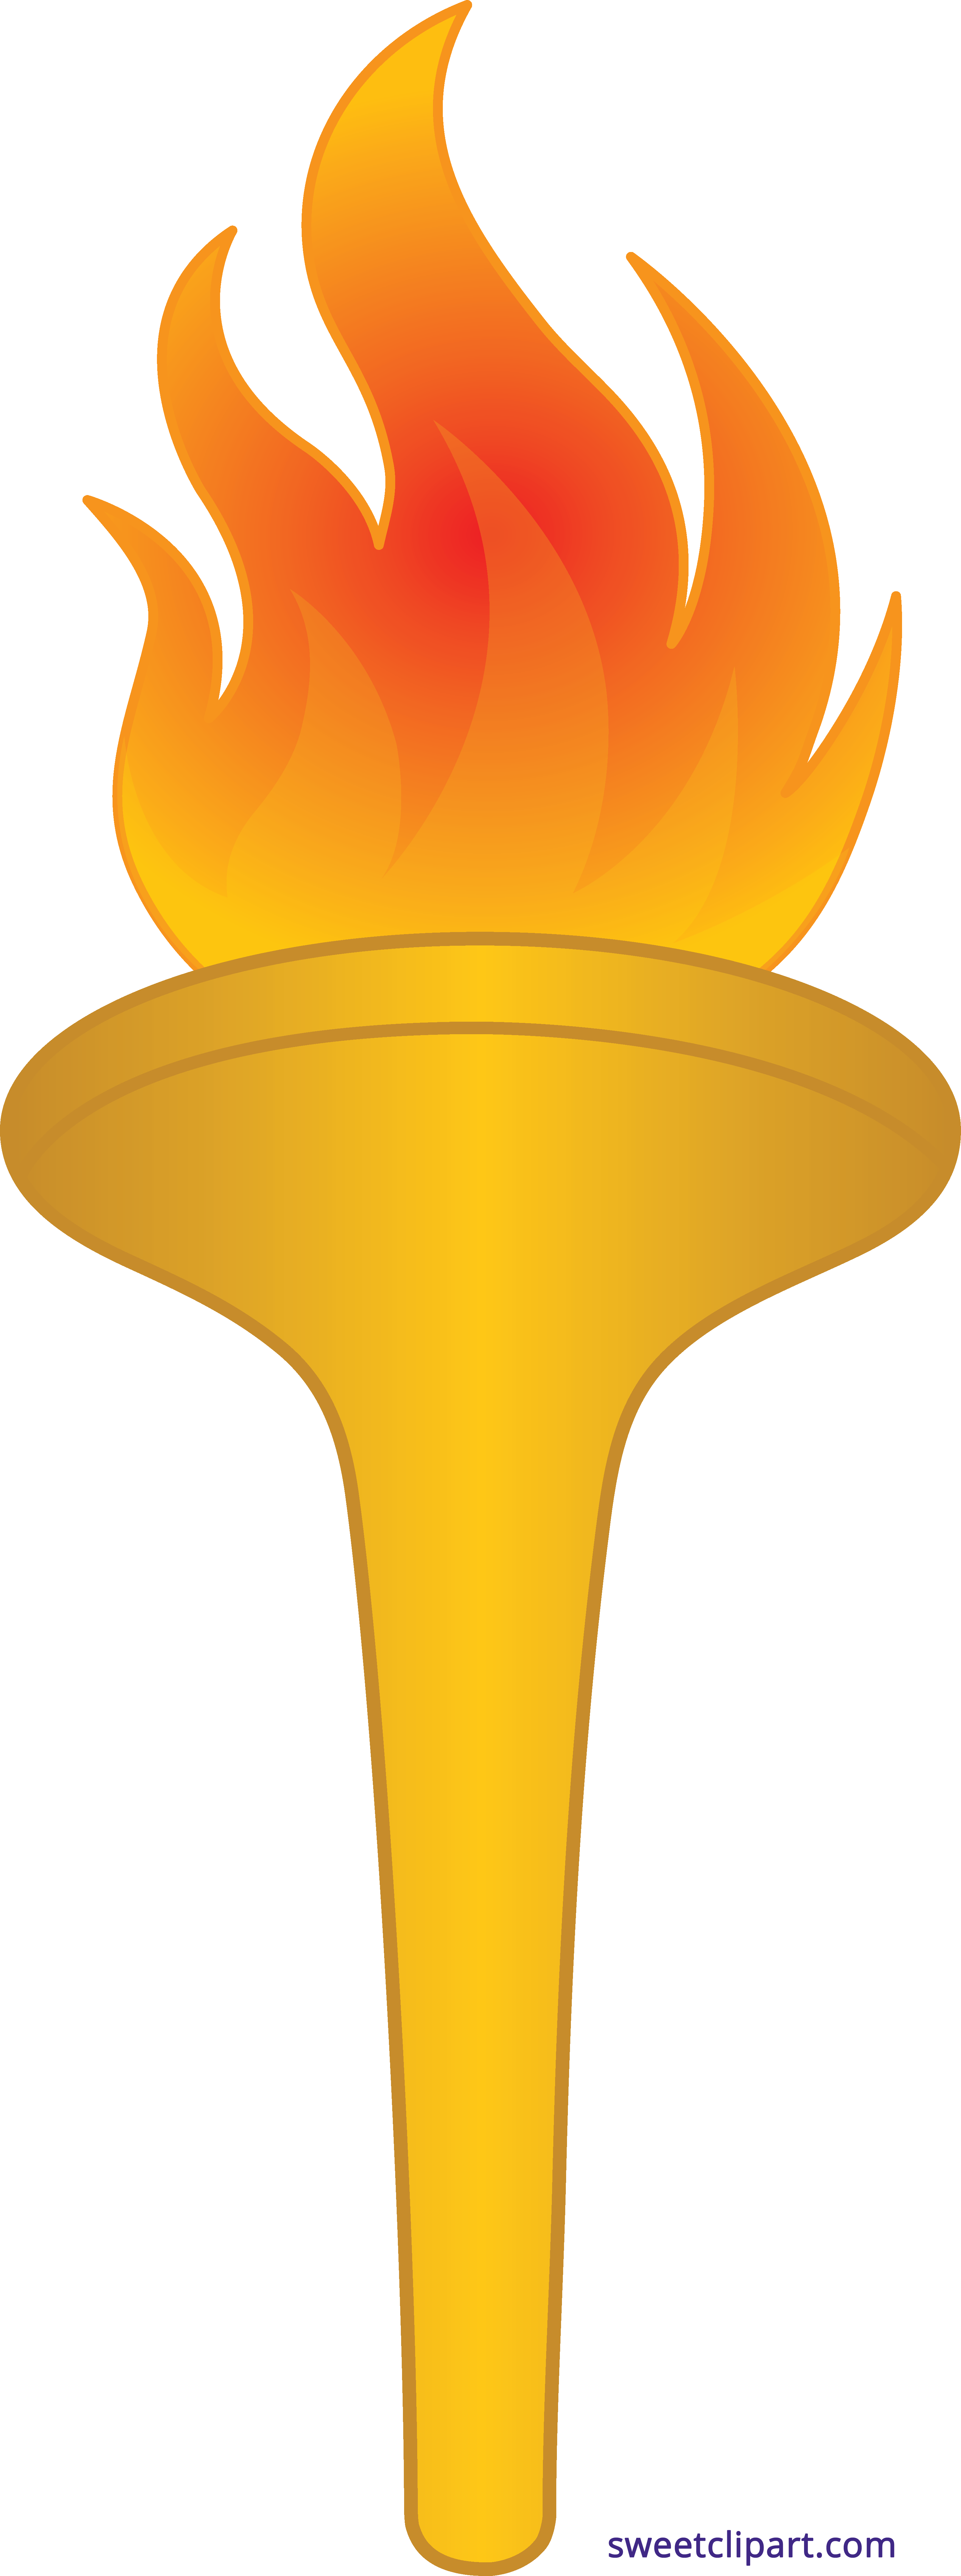 torch clipart hand holding torch